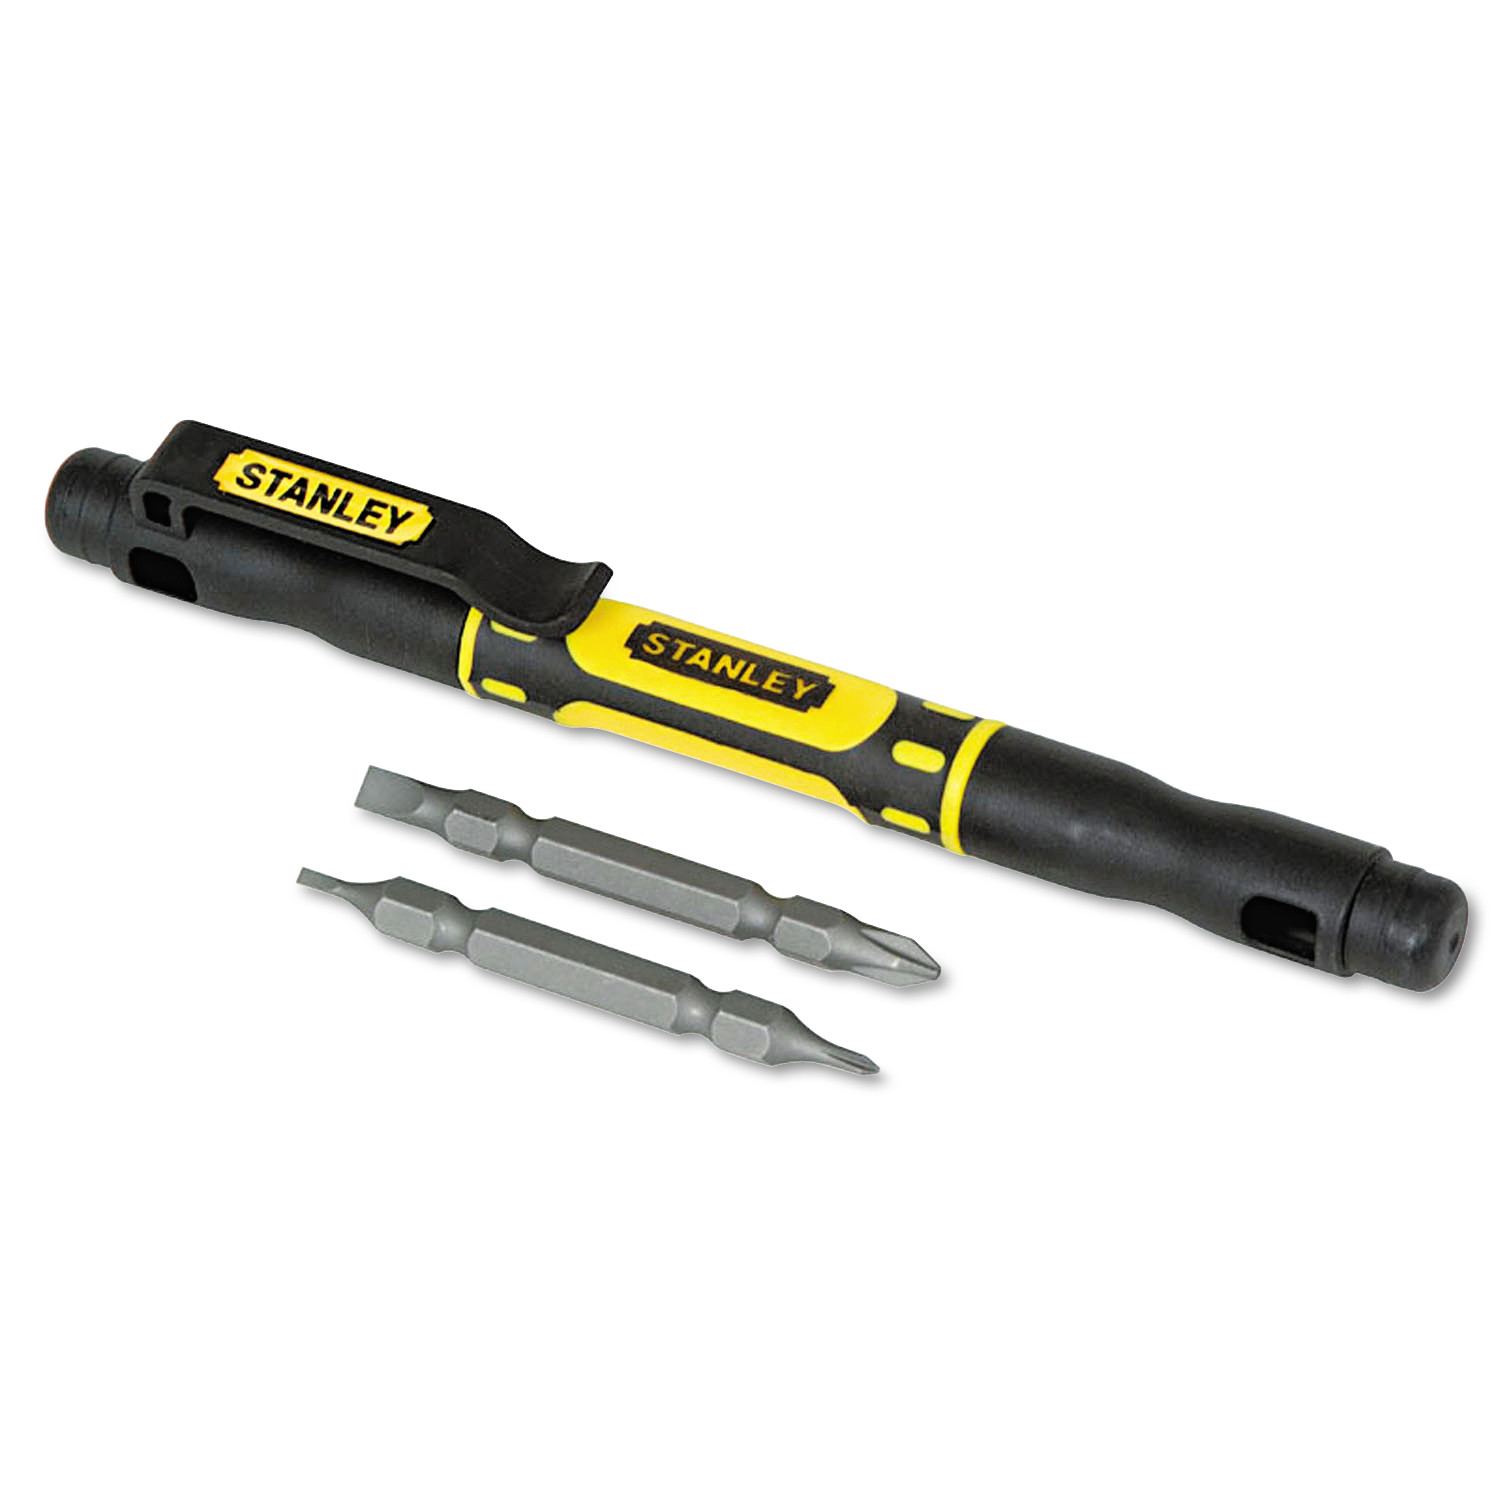 Stanley BOS66344 Four-In-One Pocket Screwdriver, Black - image 1 of 2